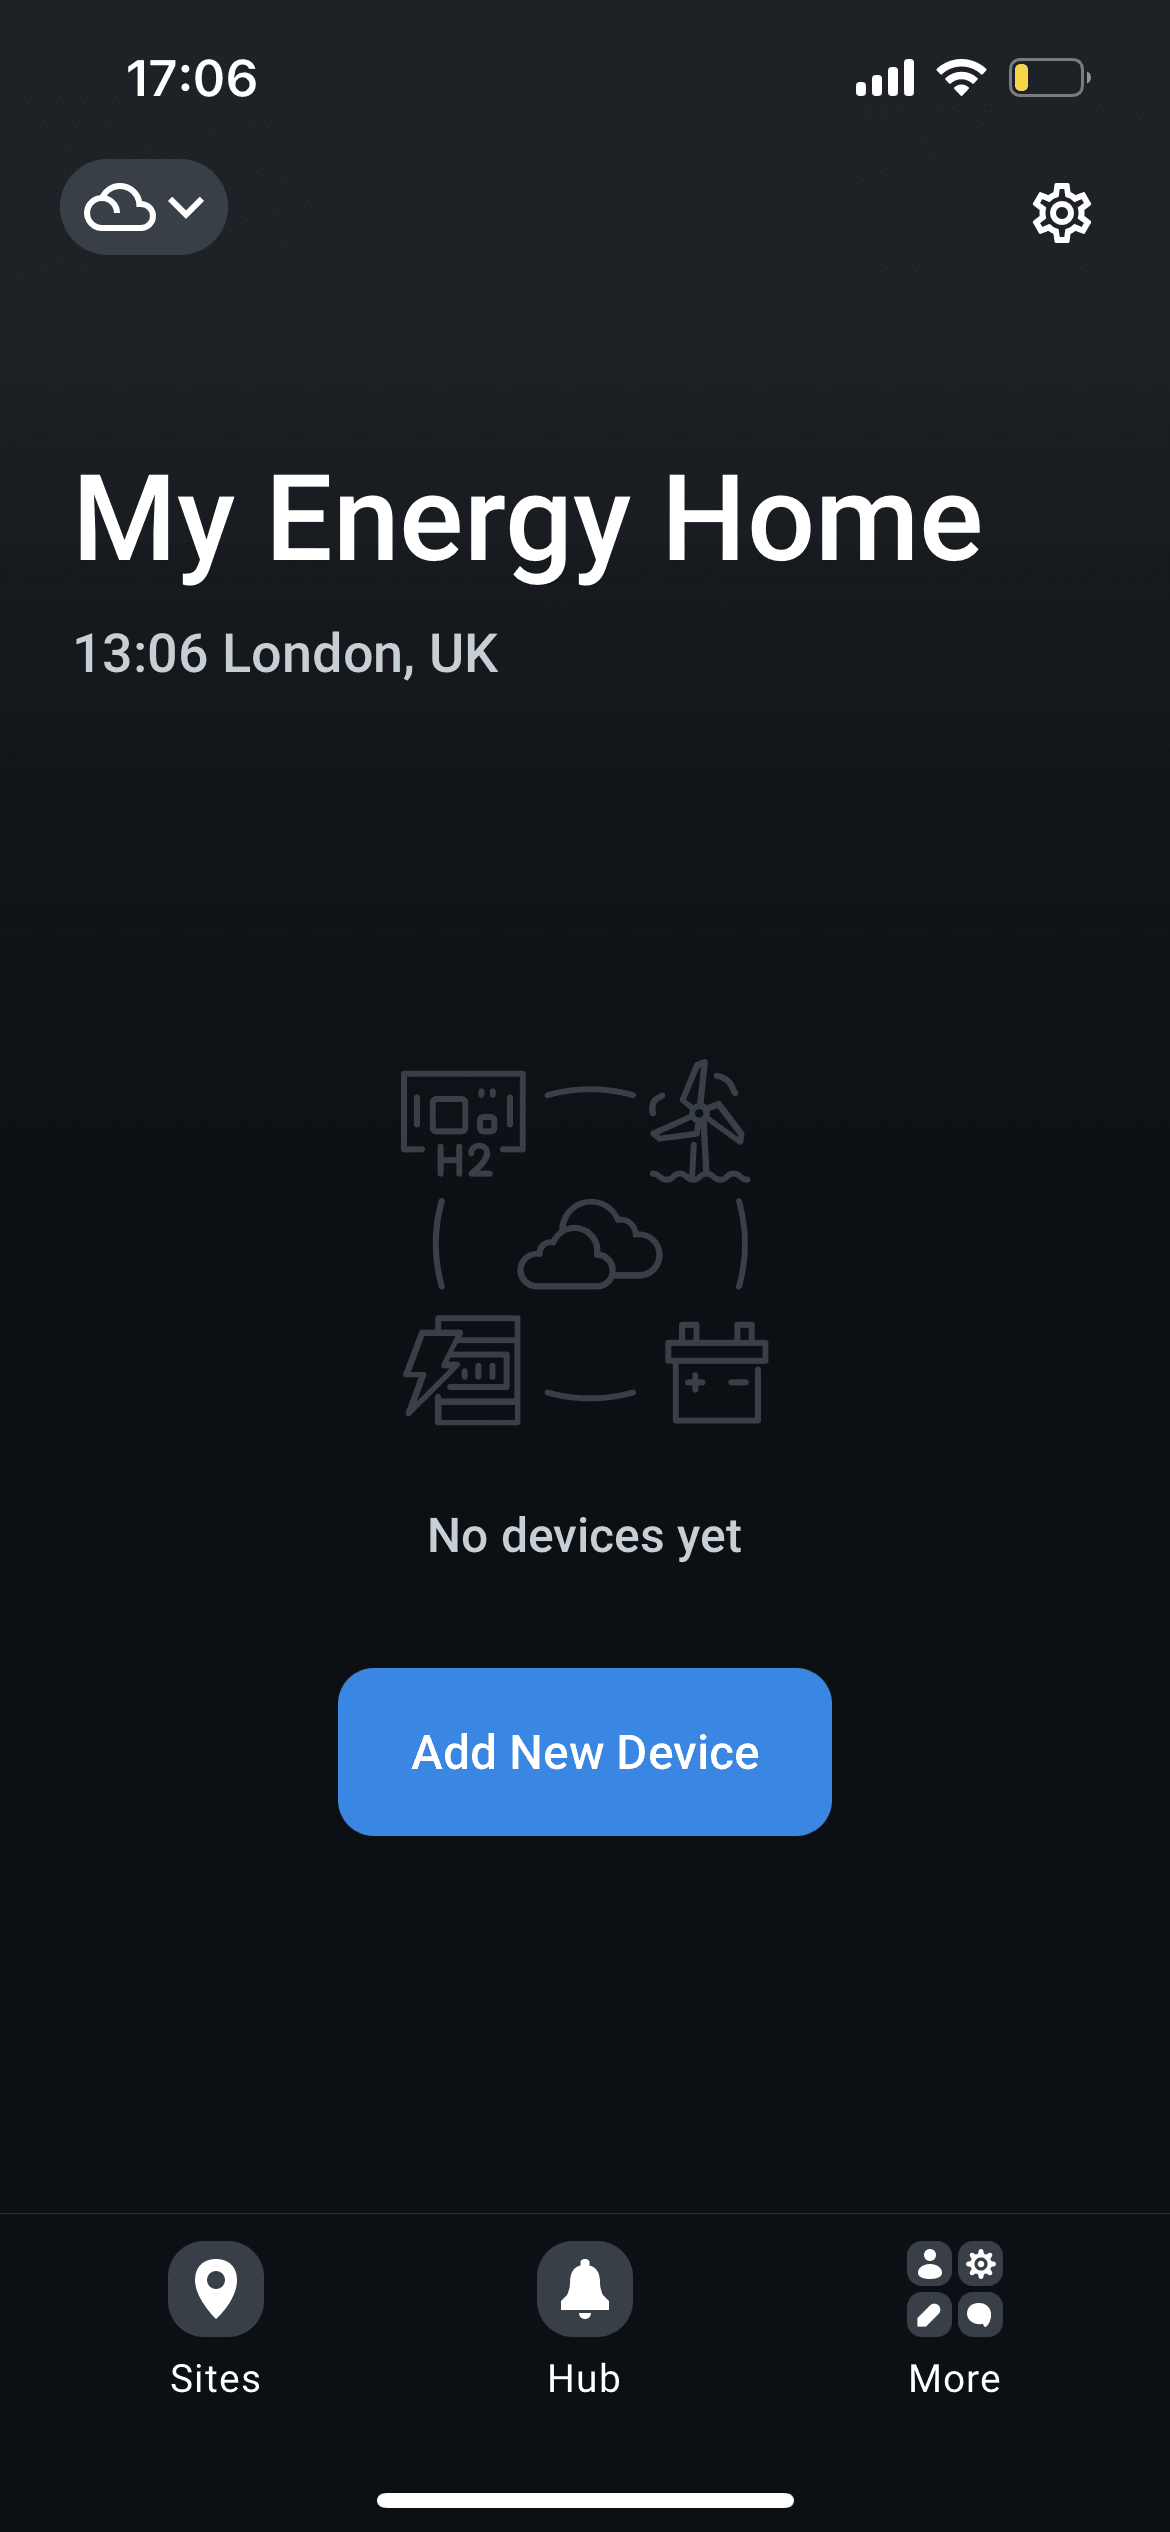 Your site is ready for adding new devices